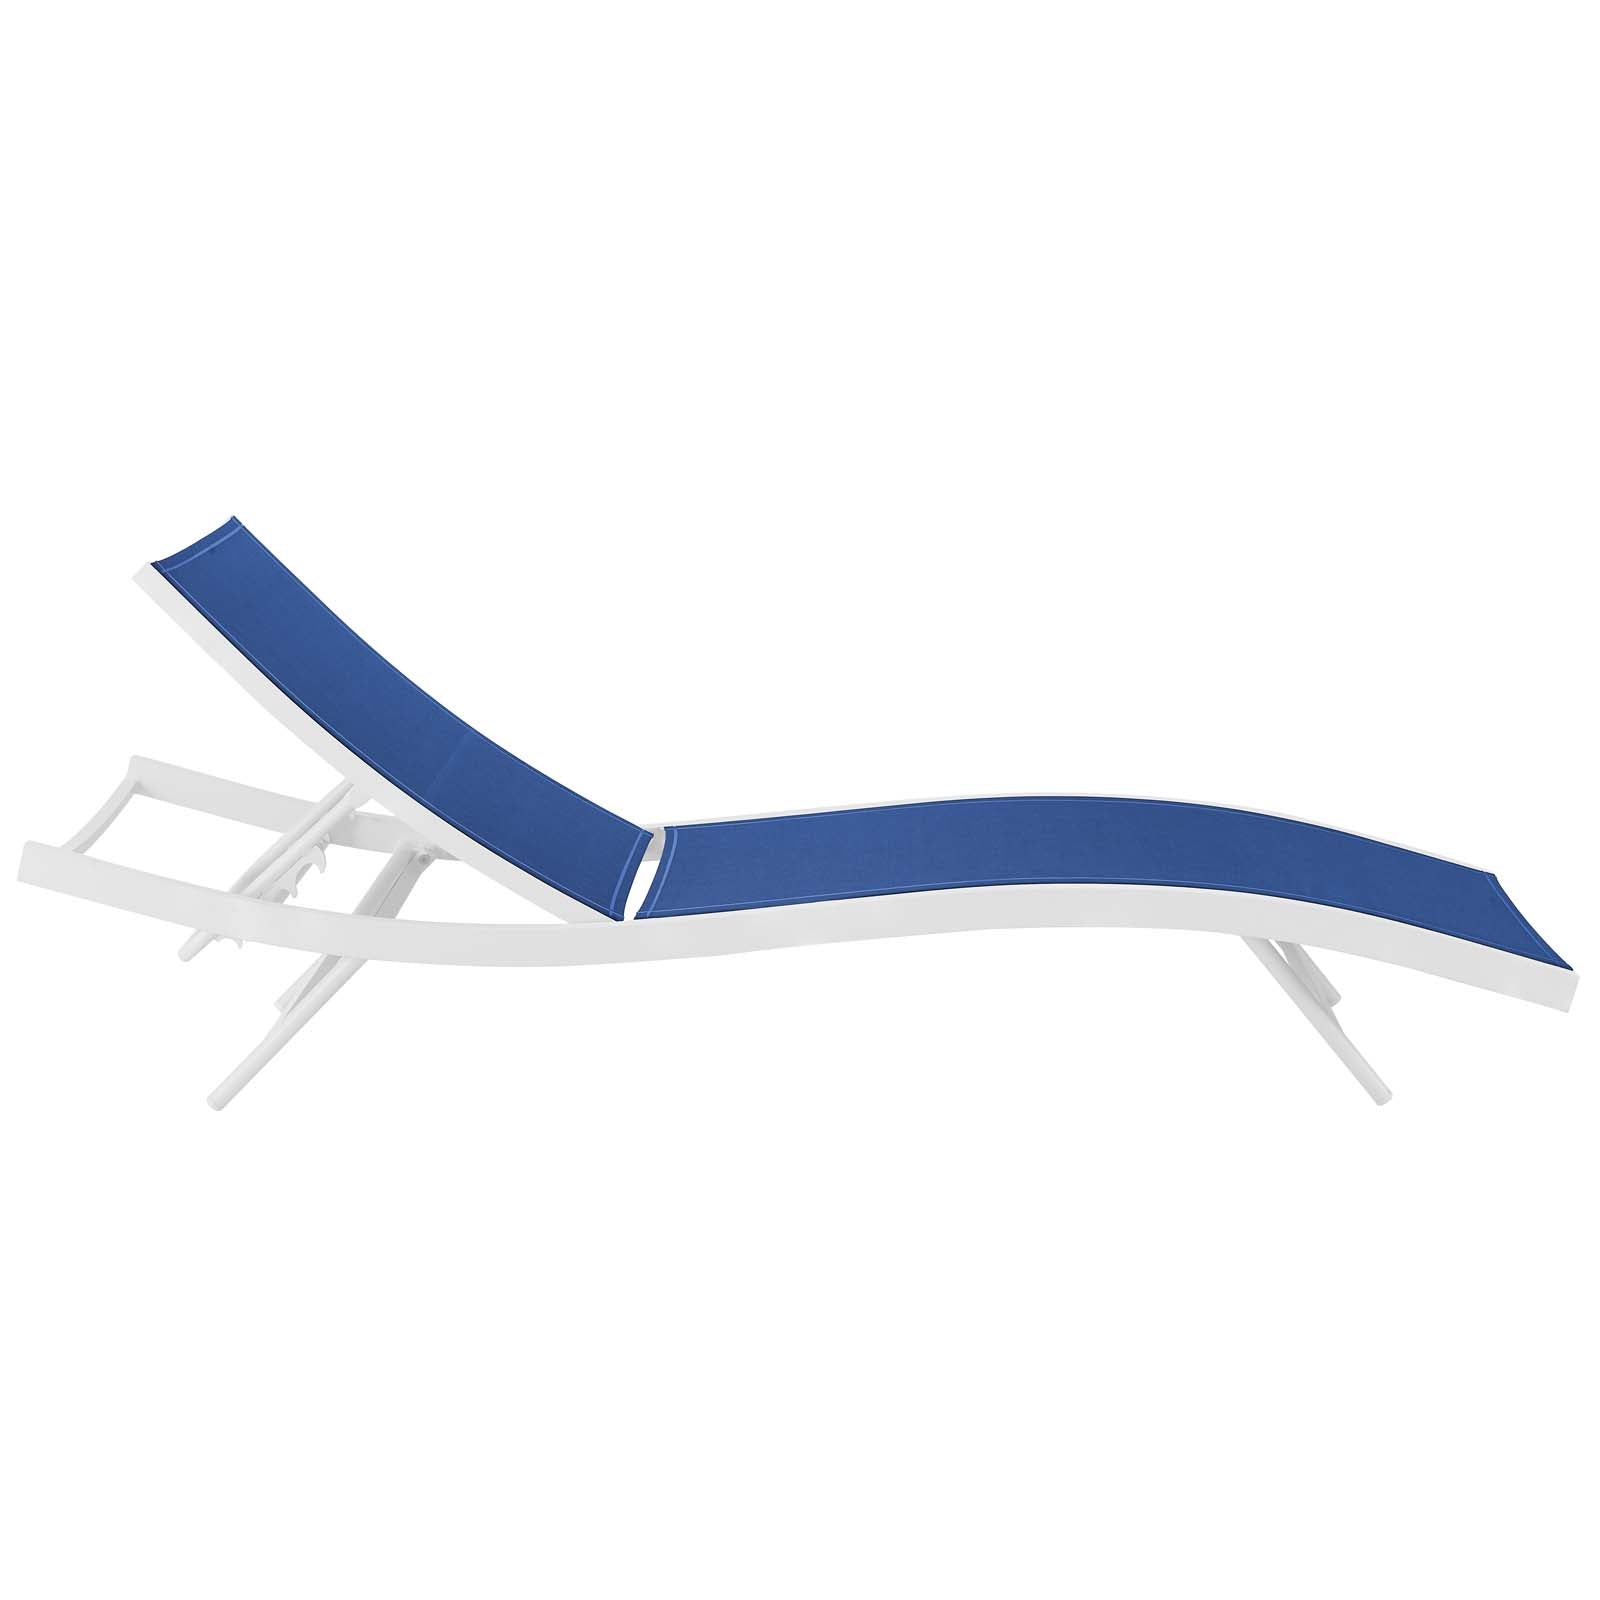 Modway Outdoor Loungers - Glimpse Outdoor Patio Mesh Chaise Lounge Chair White Navy